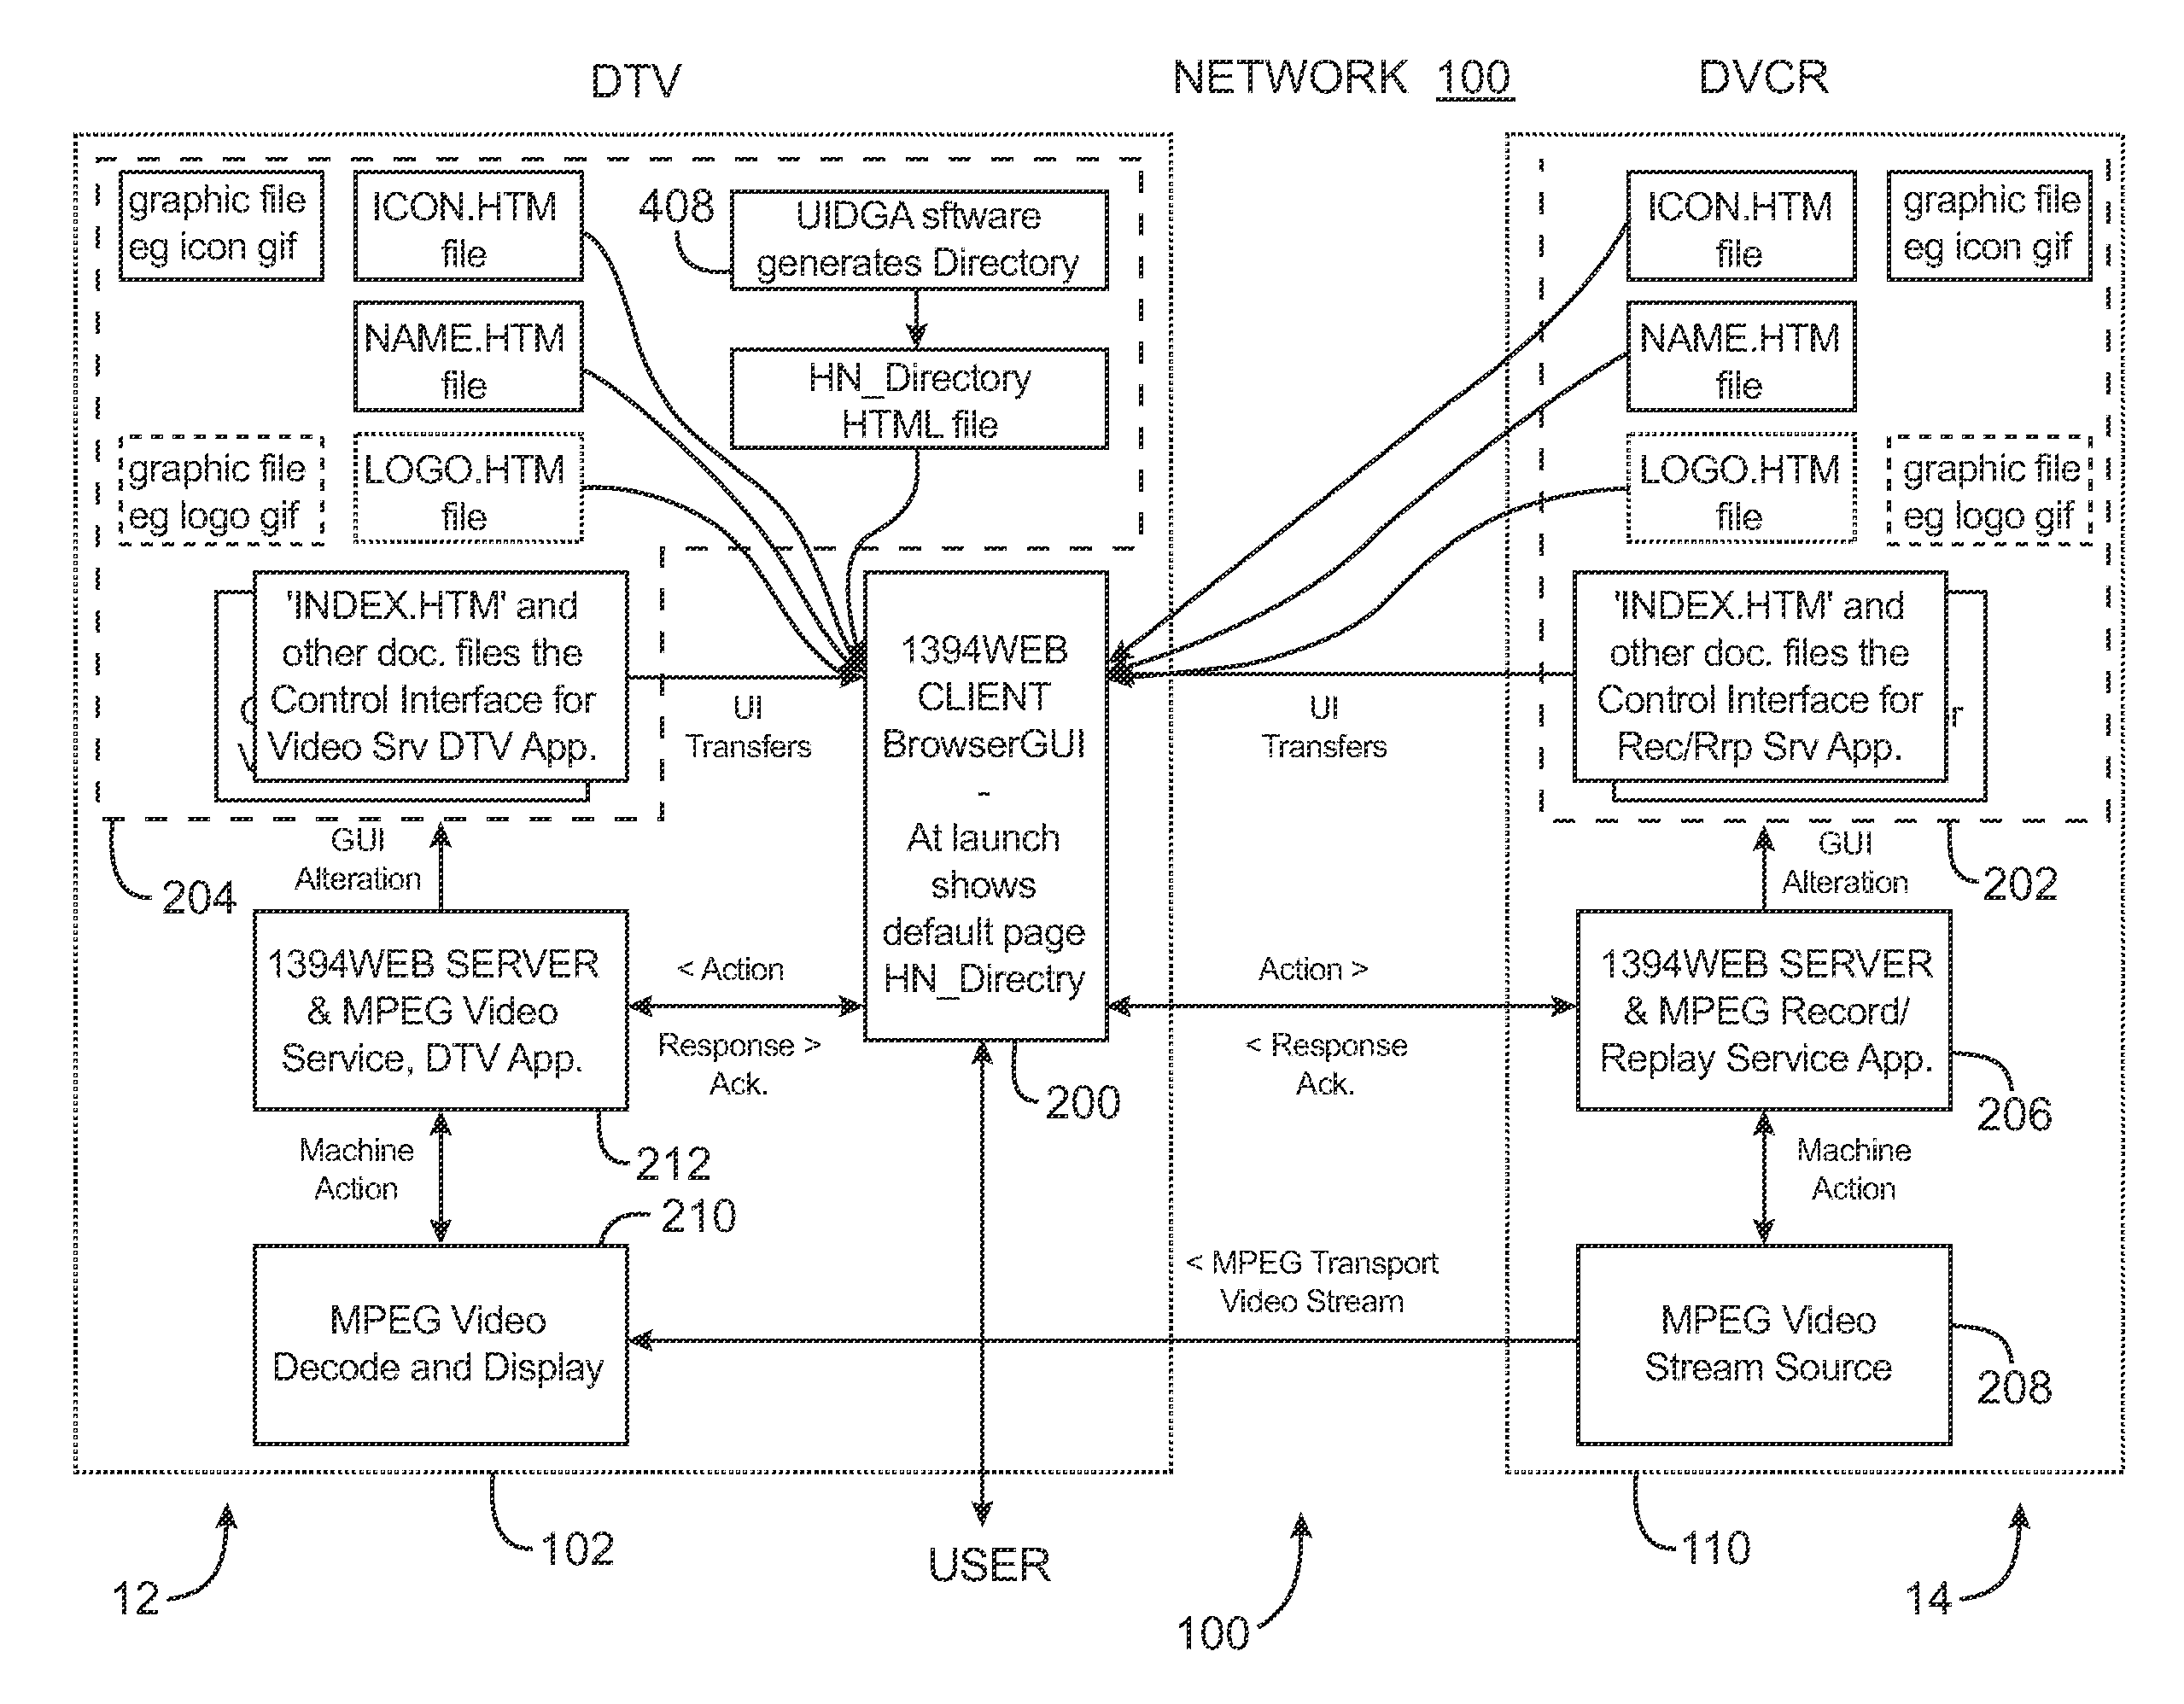 Home network device information architecture